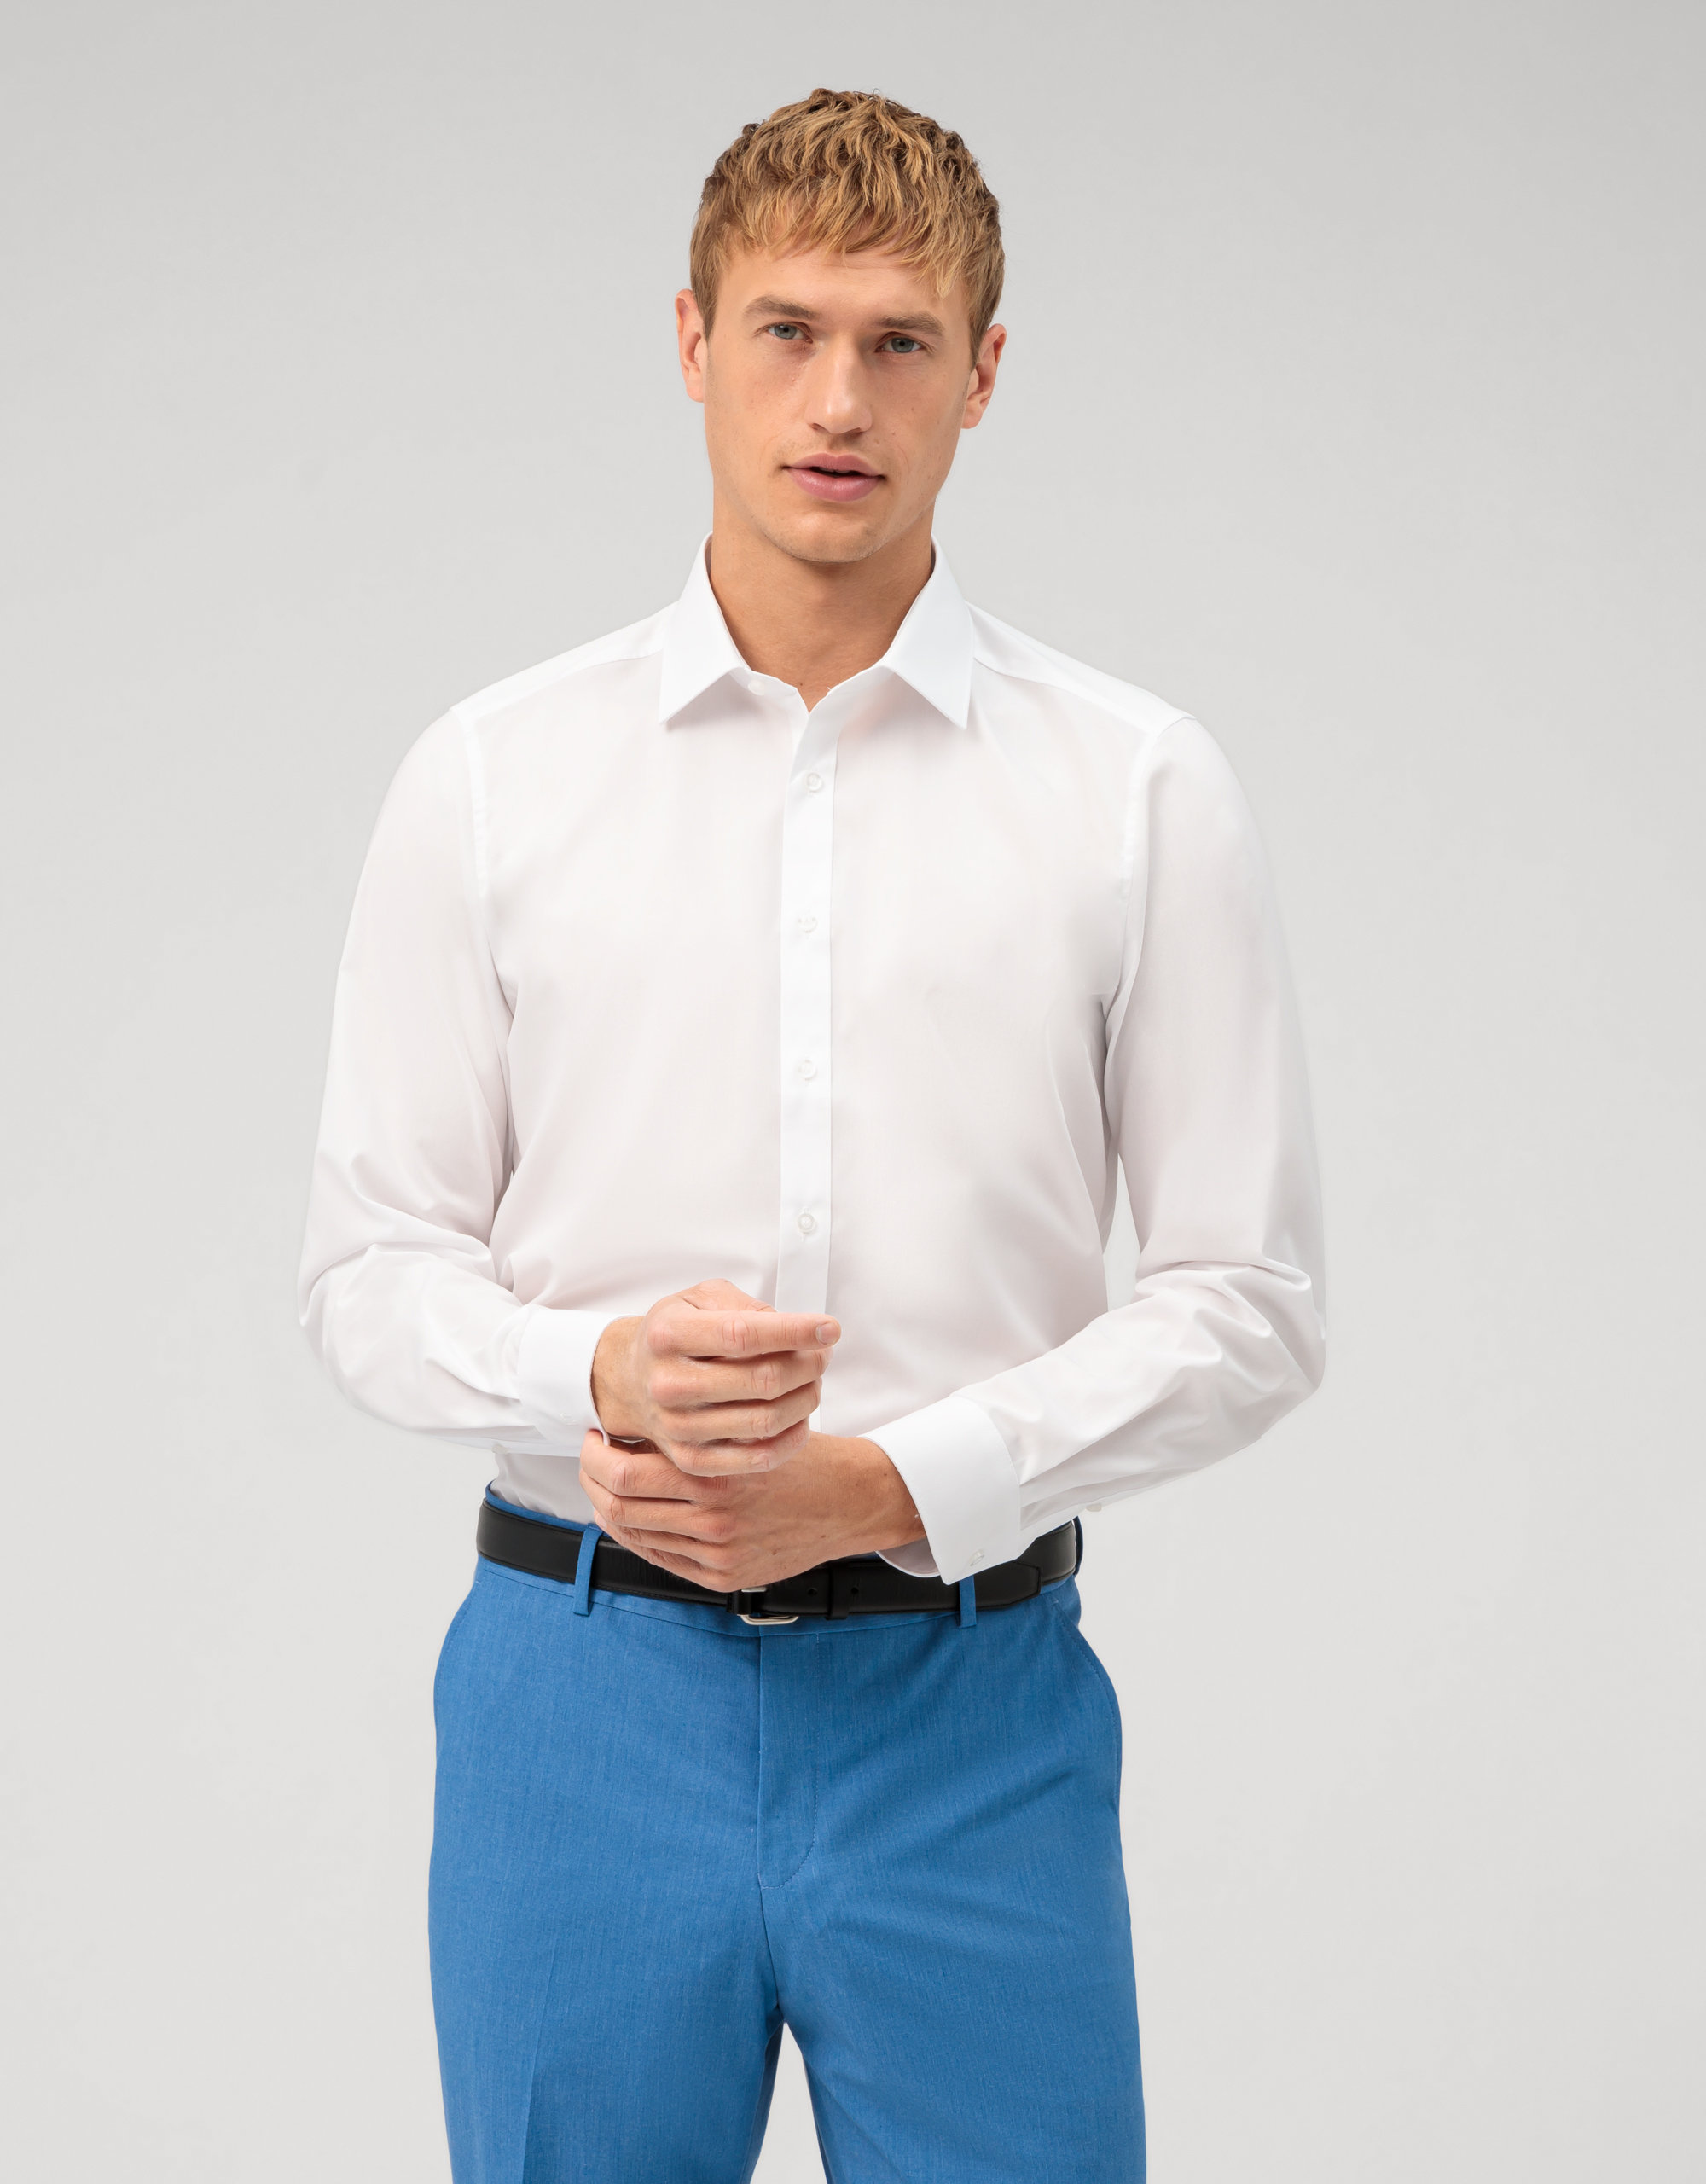 Business shirt fit, | White Five, OLYMP York | - Kent body 60906400 New Level